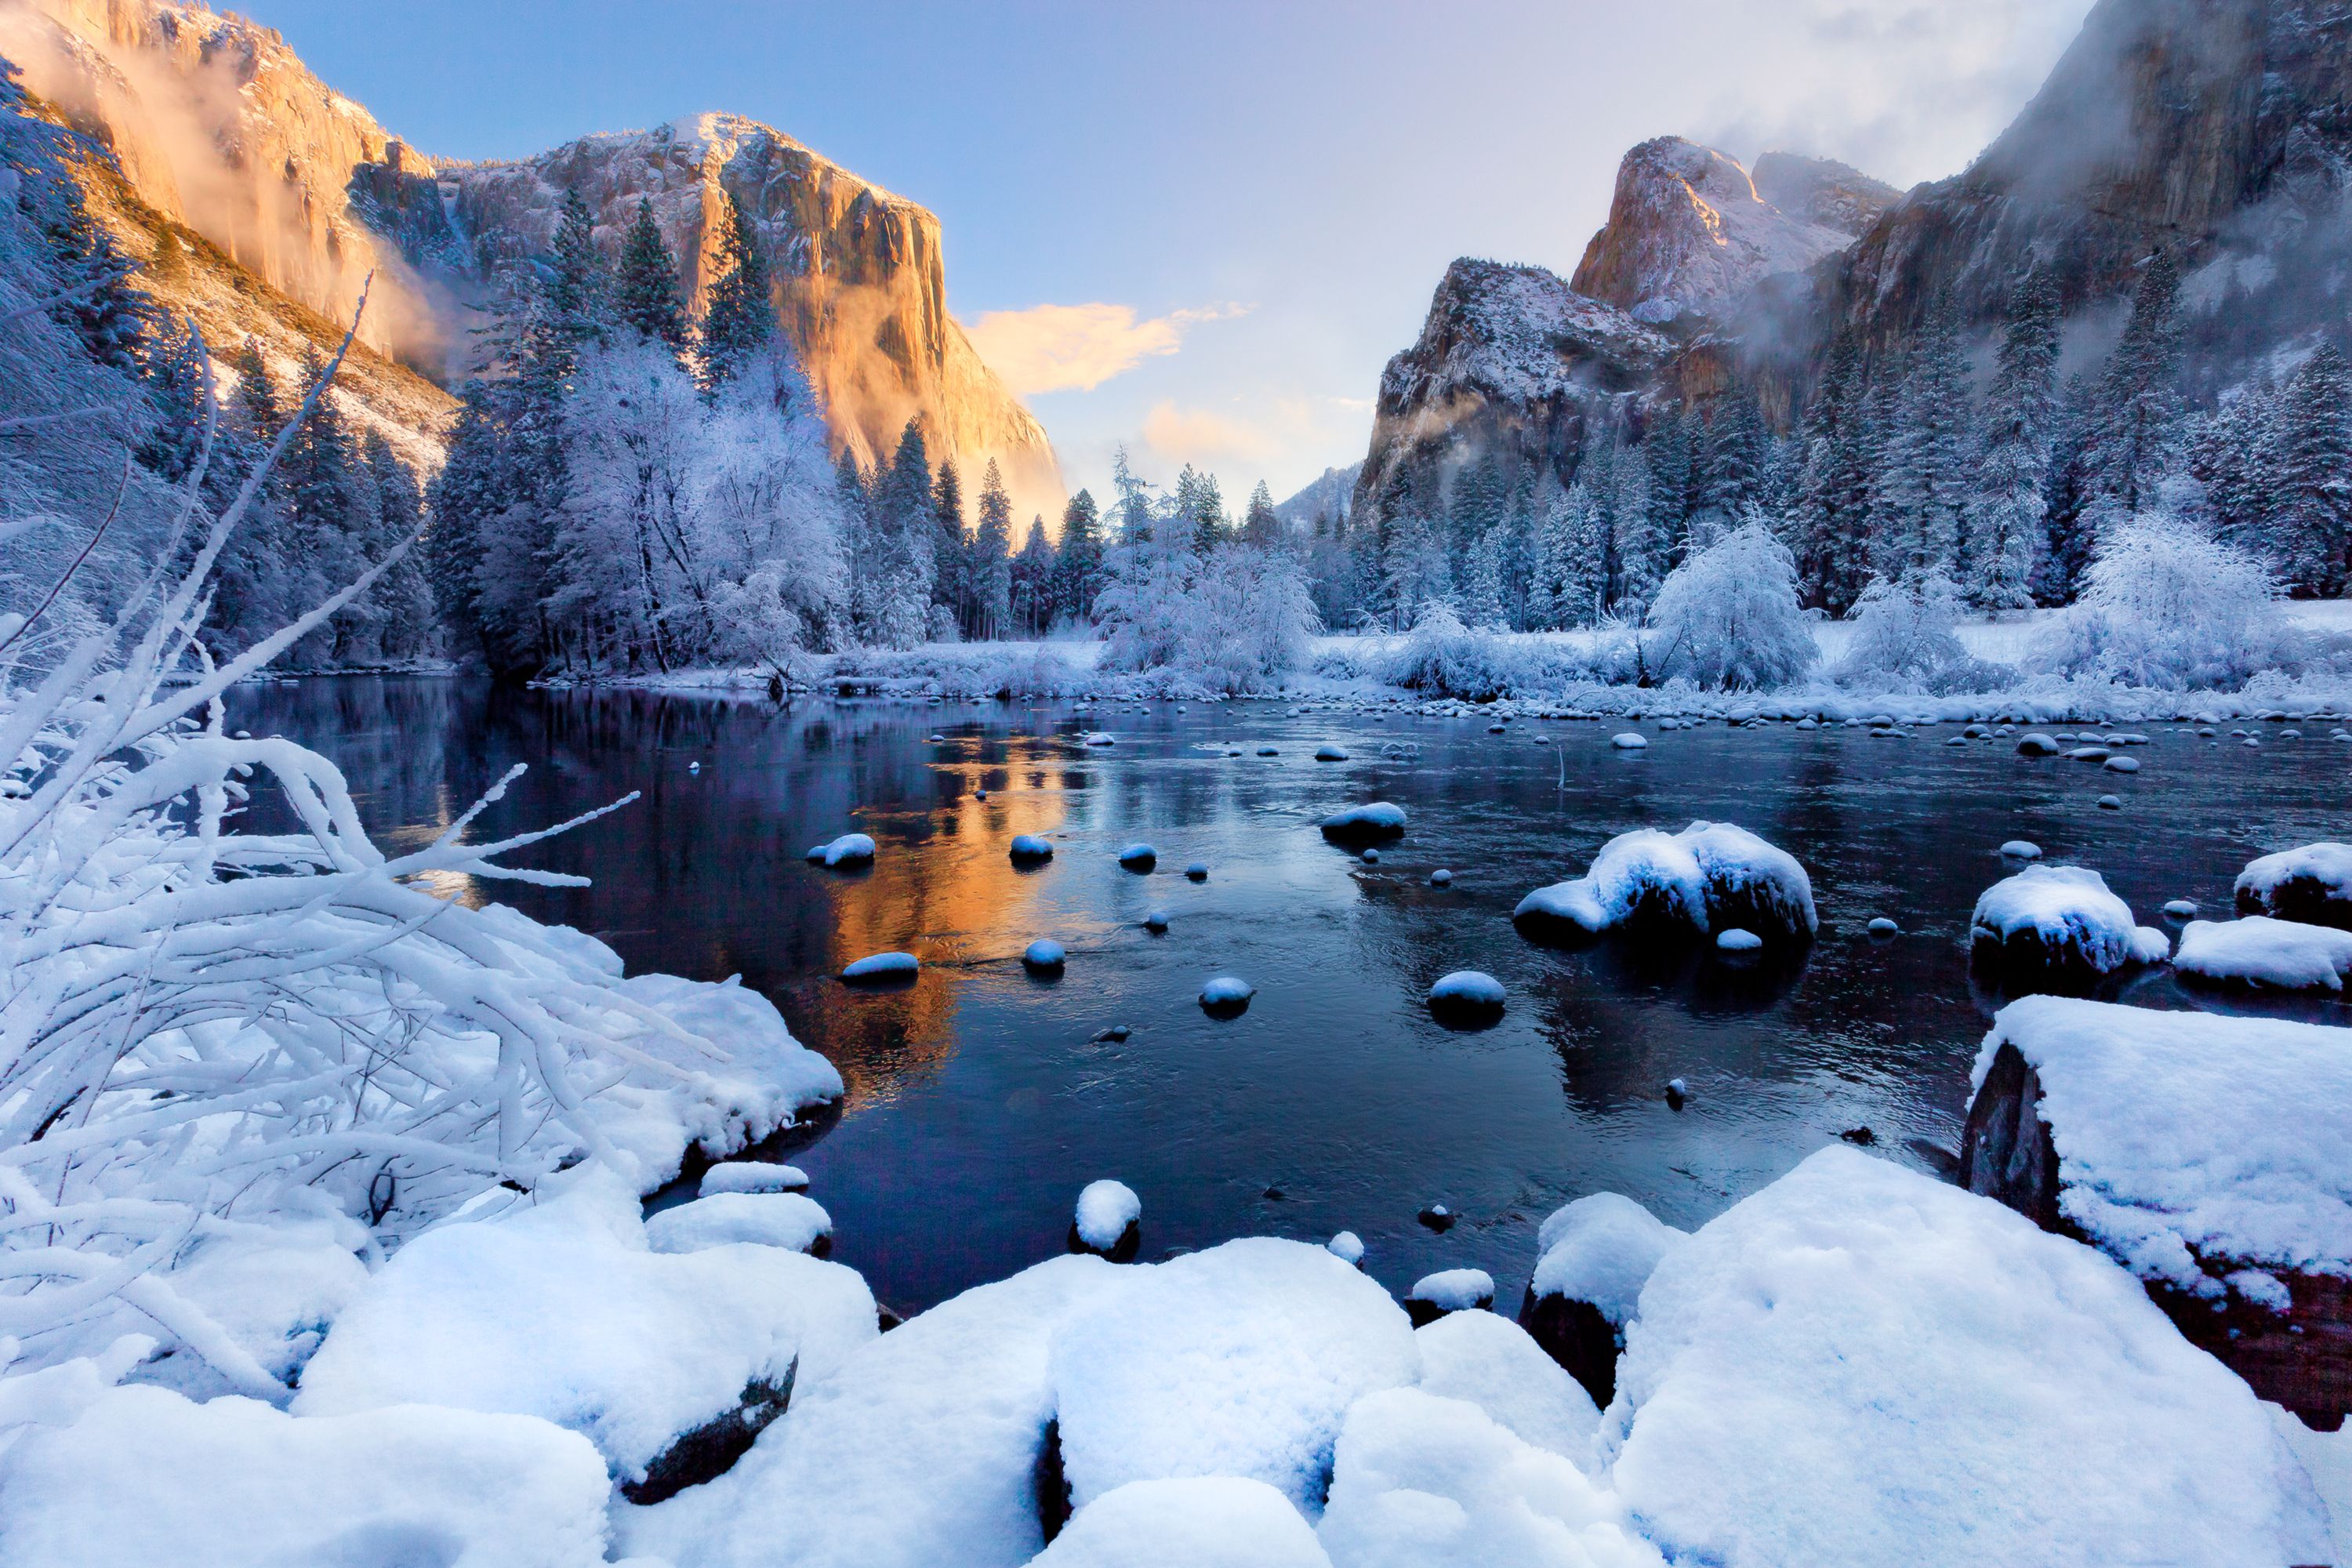 Yosemite Winter Picture On Wallpaper HD 3000 X 2000 National Park Snowing